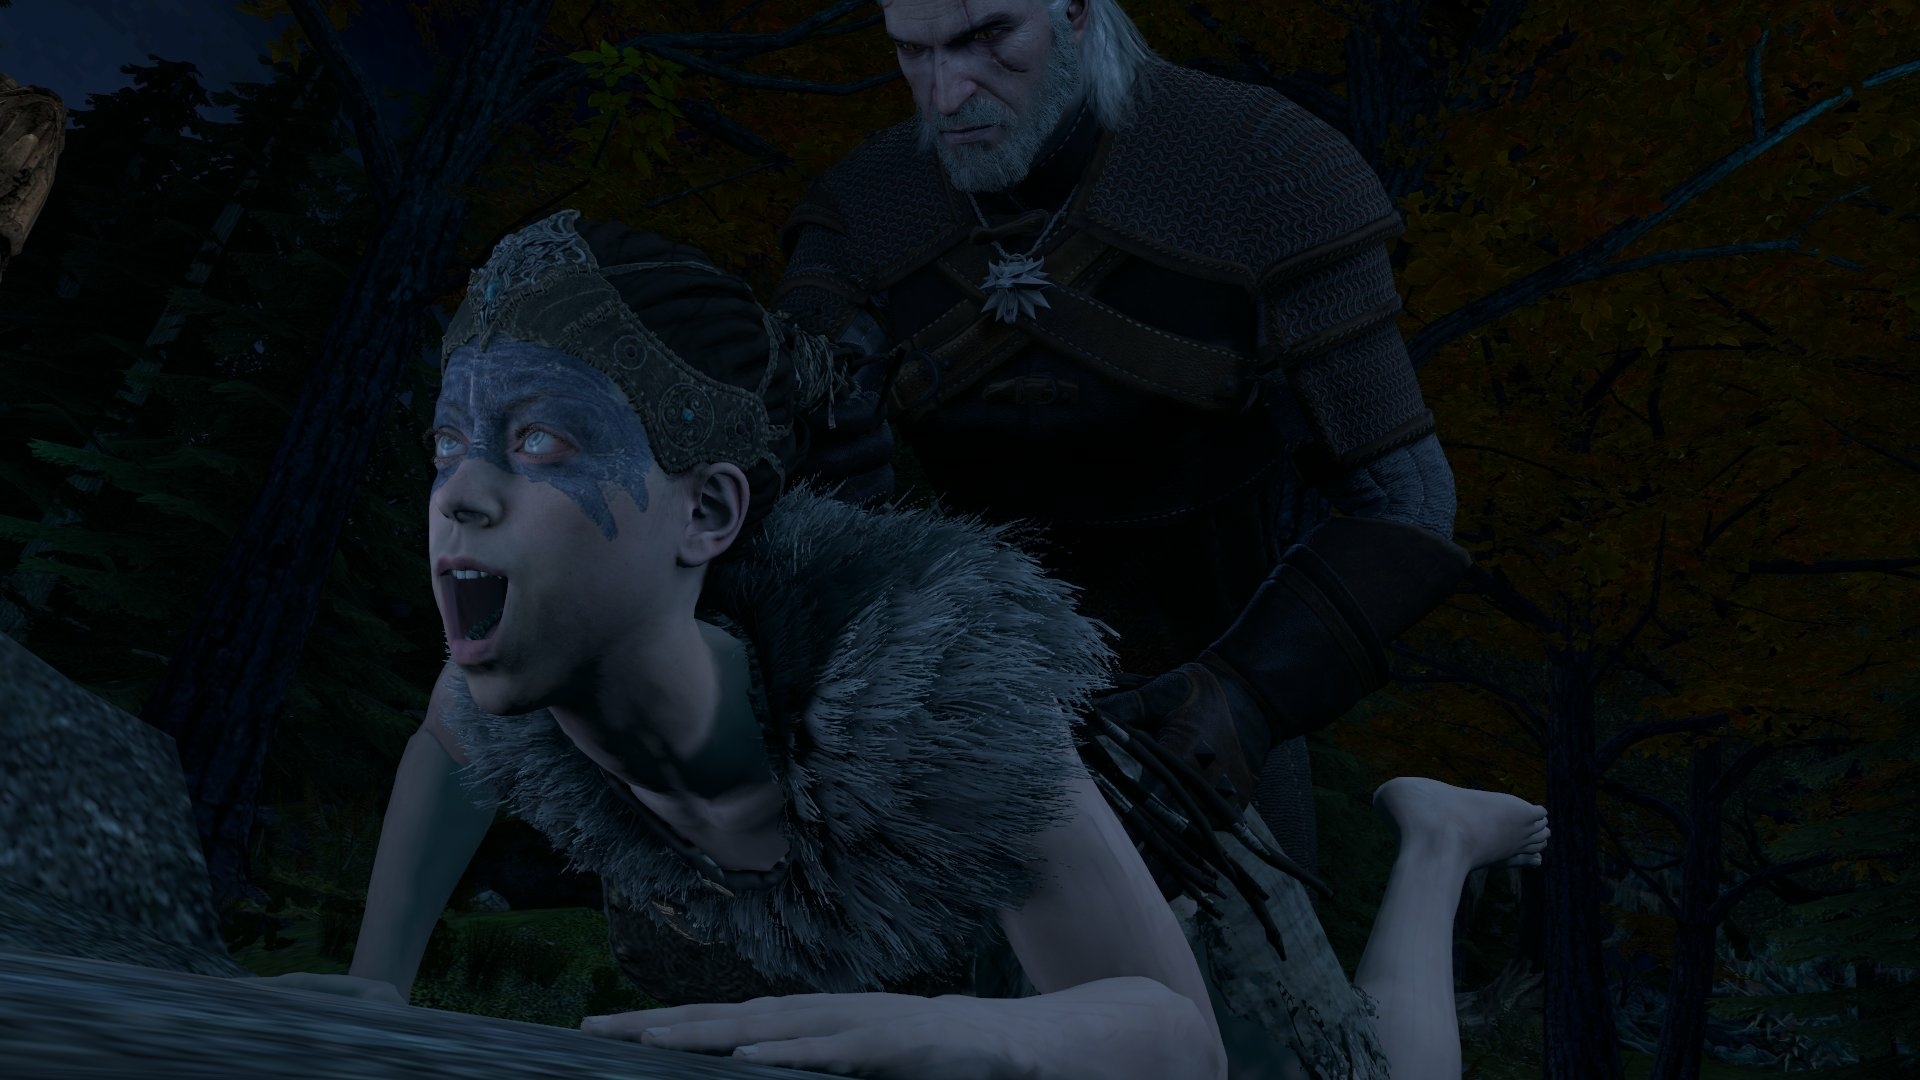 The Witcher/Hellblade Crossover: Geralt plows Senua Senua Geralt of rivia The Witcher Anal Anal Penetration Boobs Big boobs Tits Ass Big Ass Cake Sexy Horny Face Horny 3d Porn